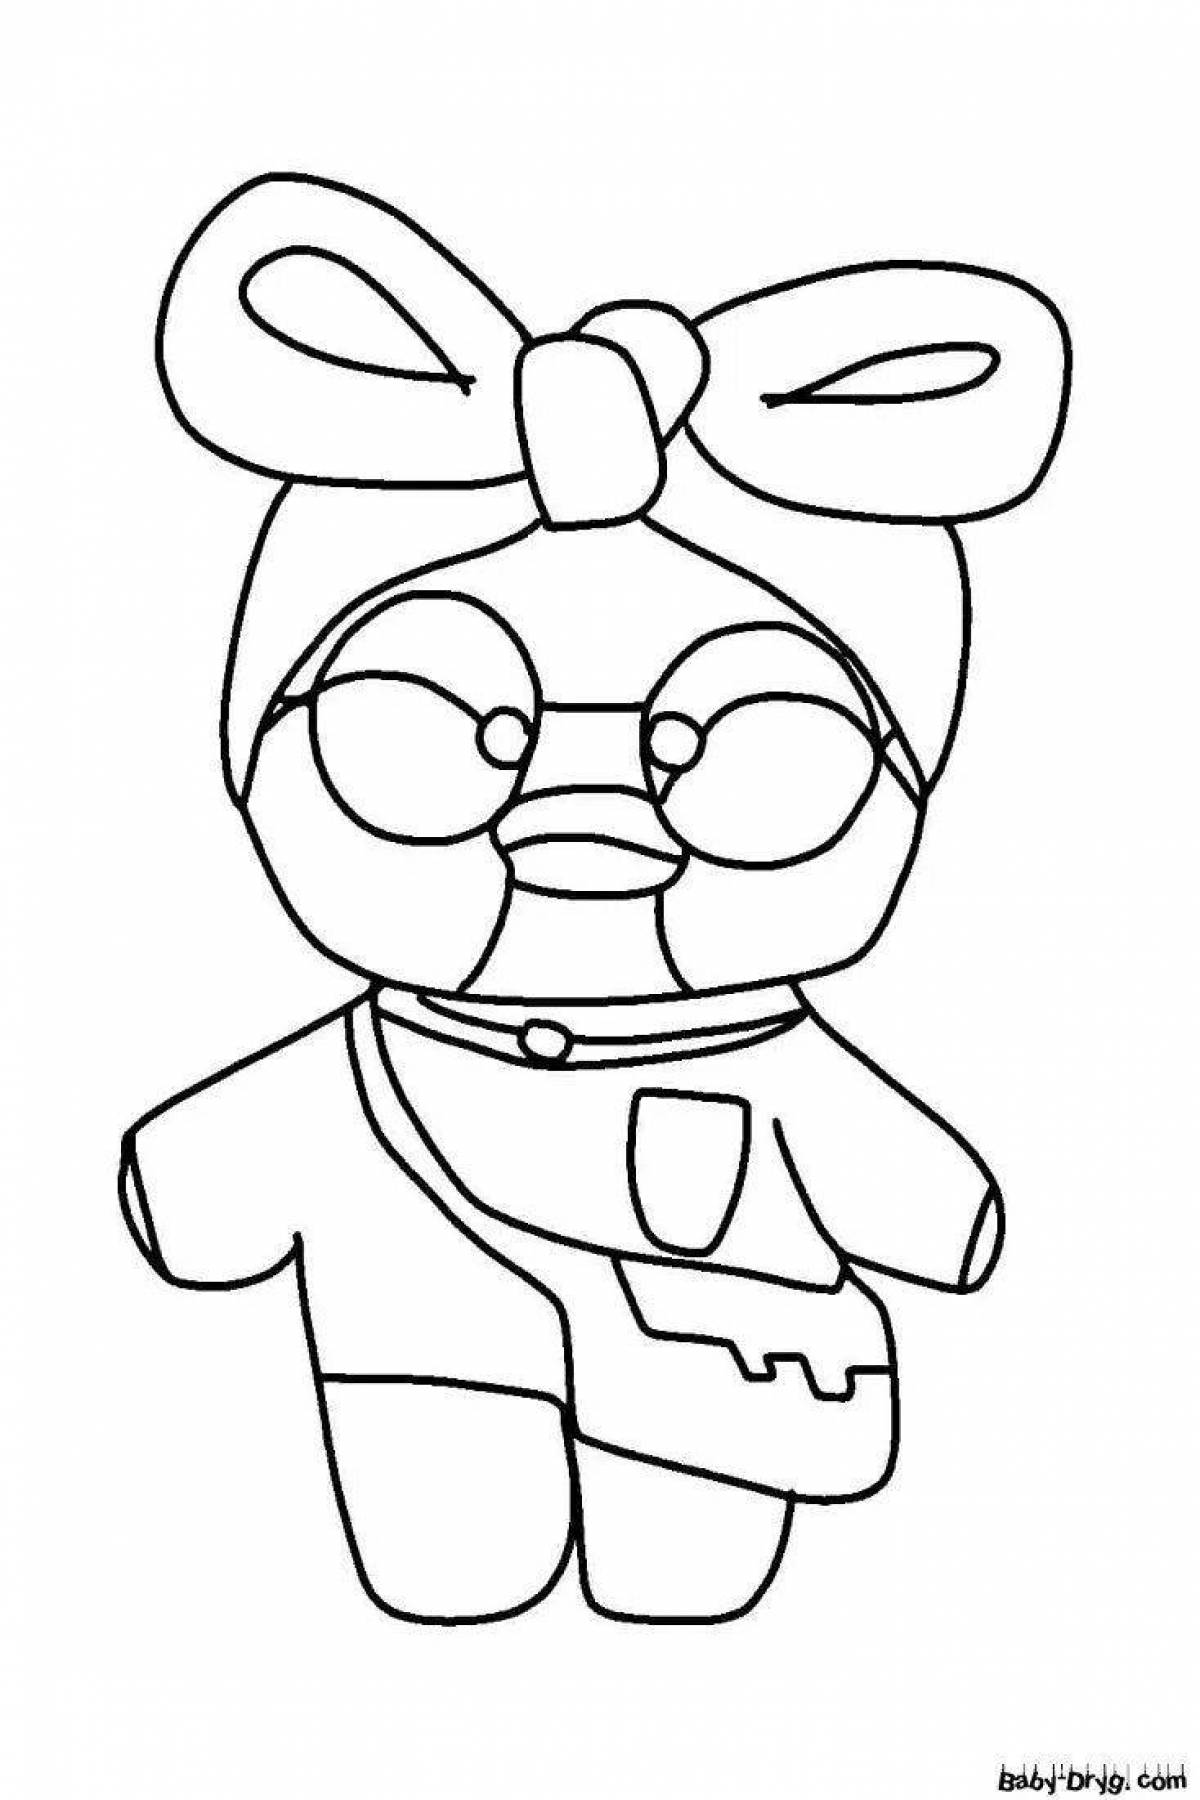 Lalafan flawless duck coloring page